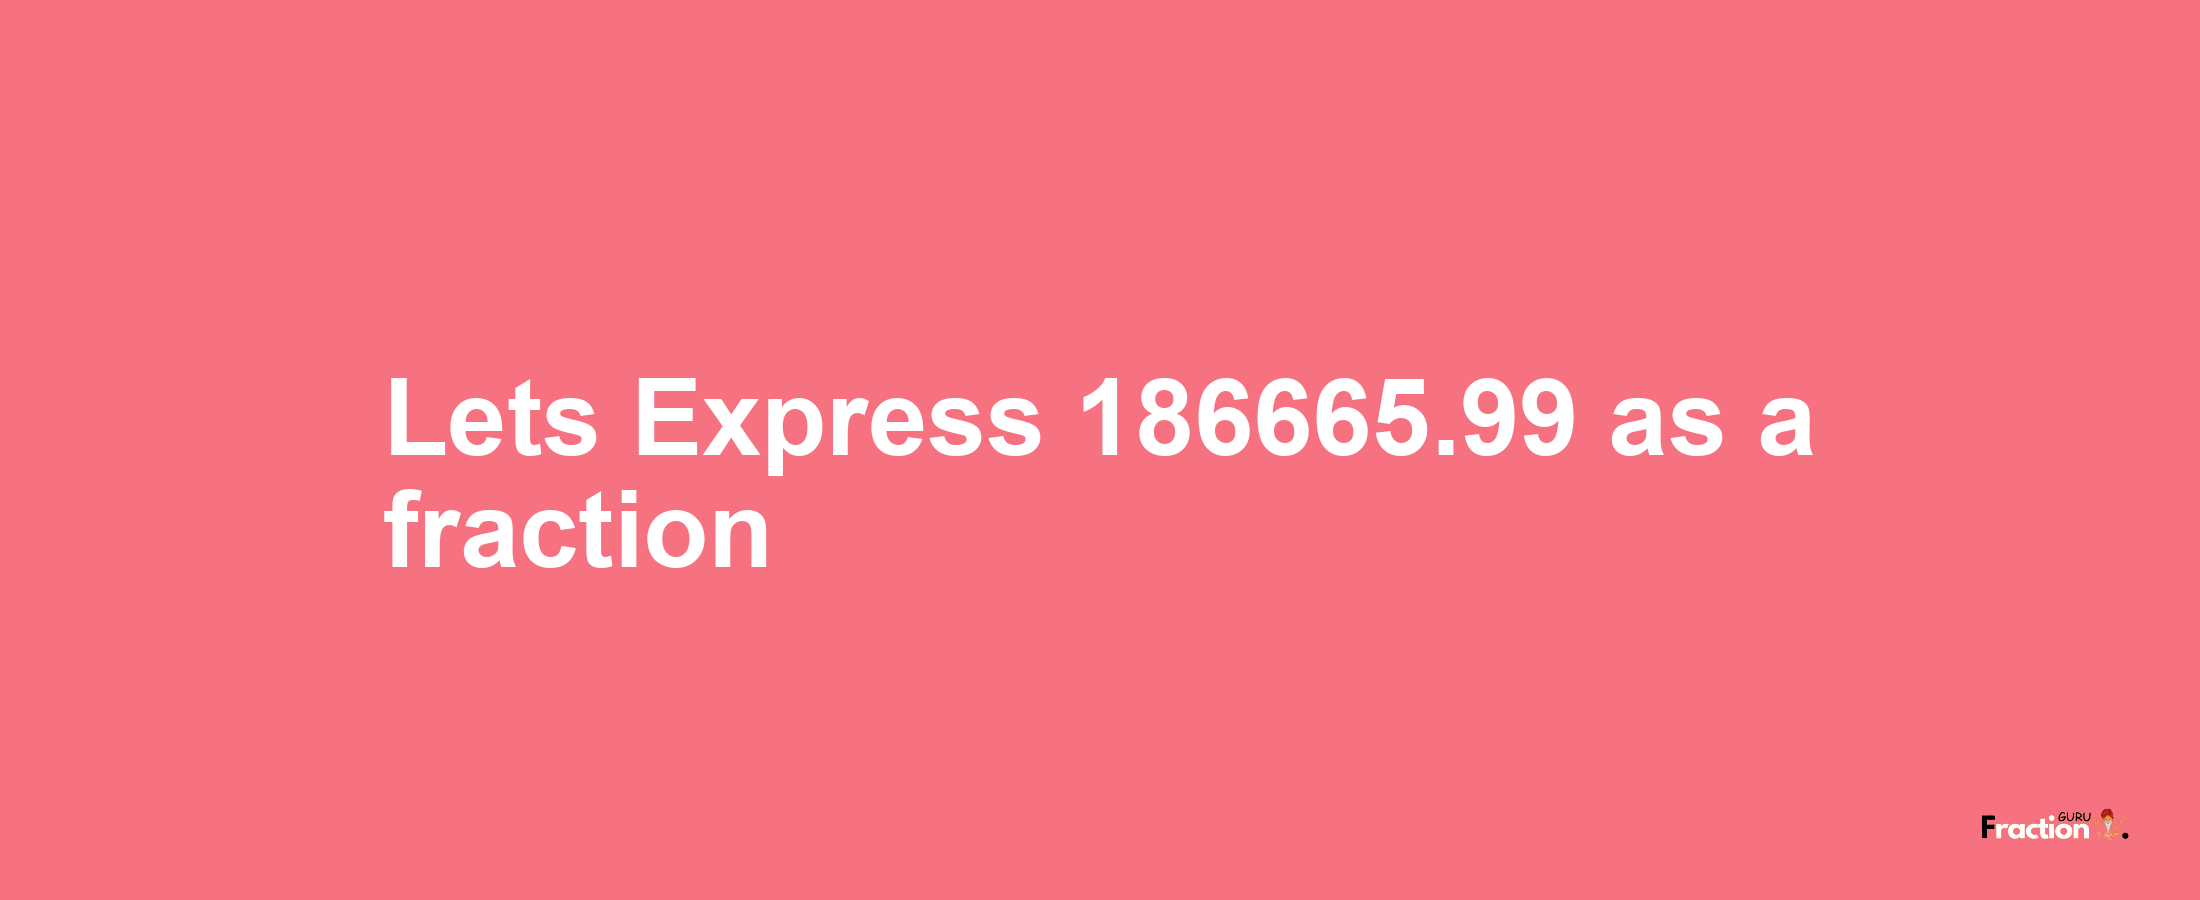 Lets Express 186665.99 as afraction